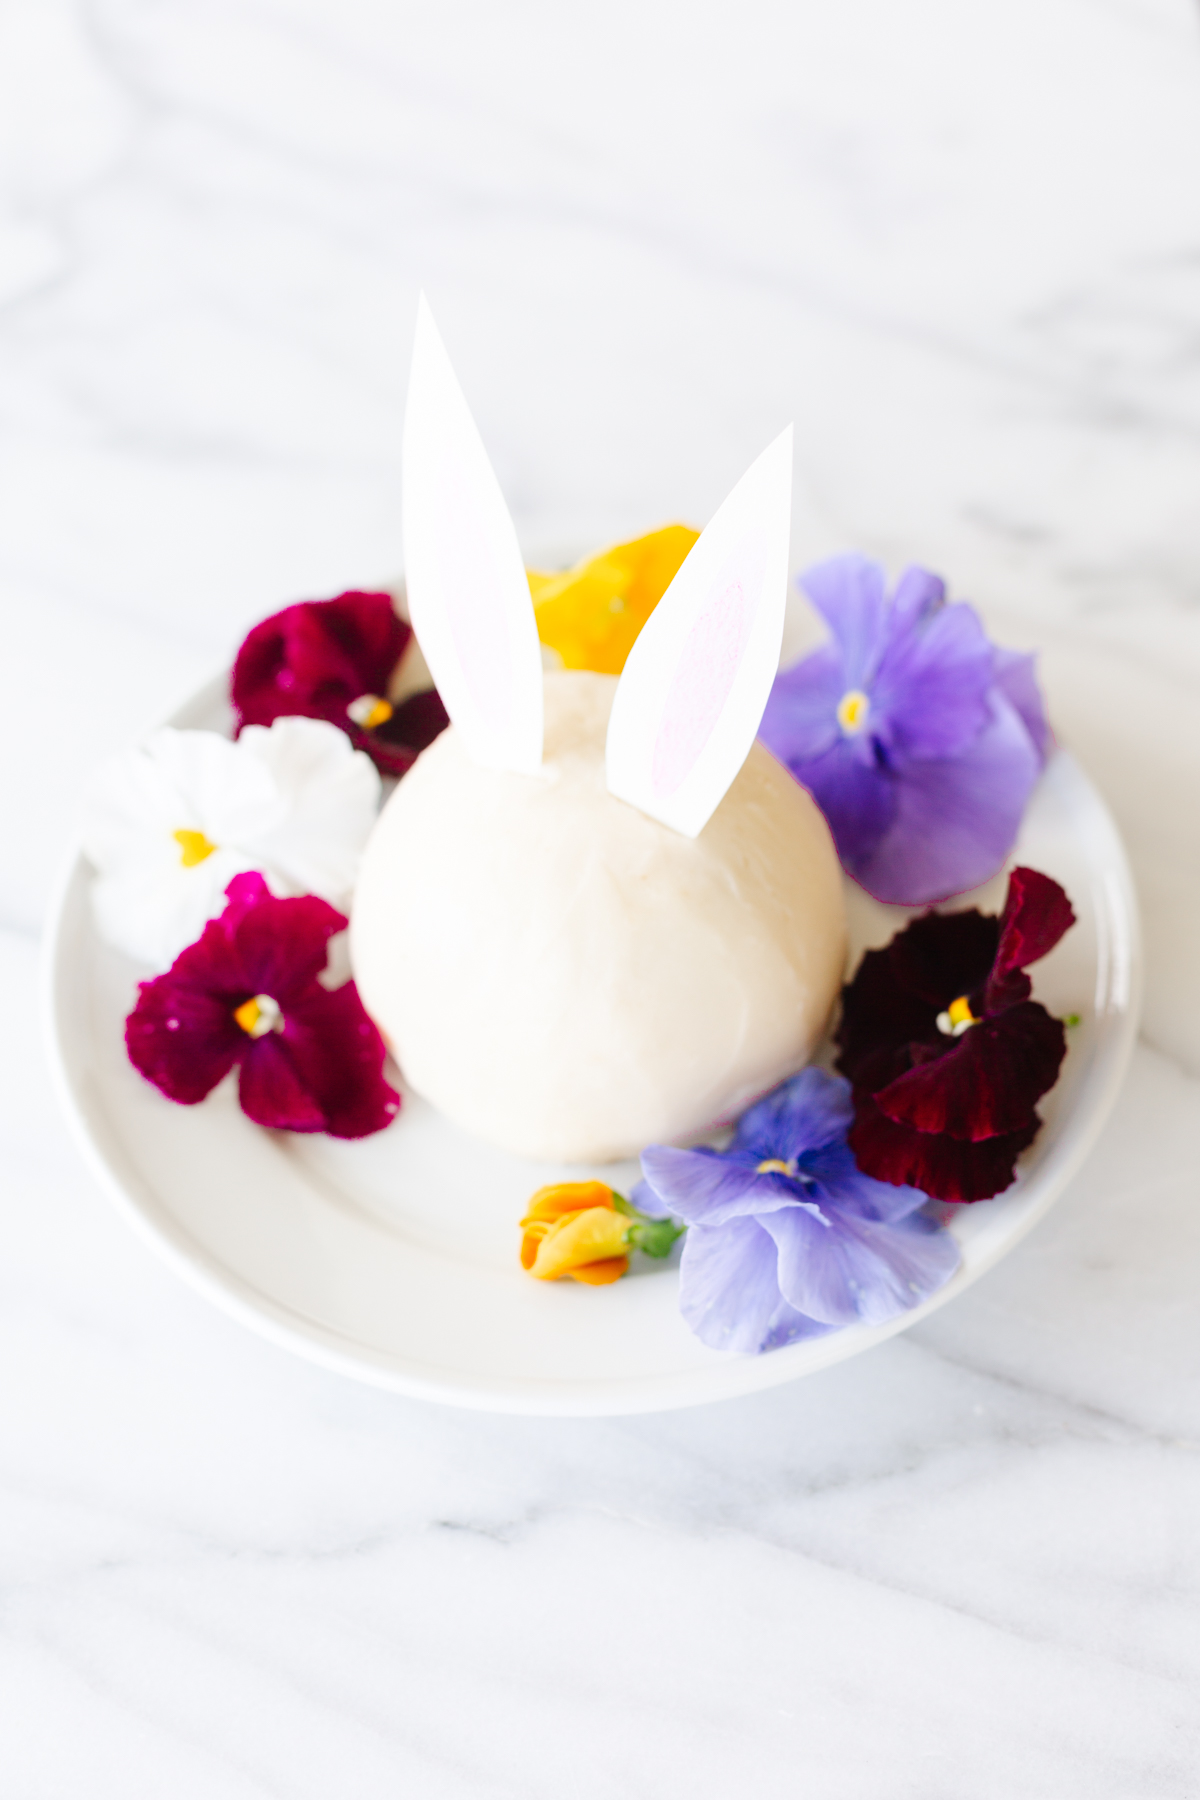 A bunny shaped cheese ball recipe adorned with flowers displayed on a white plate.